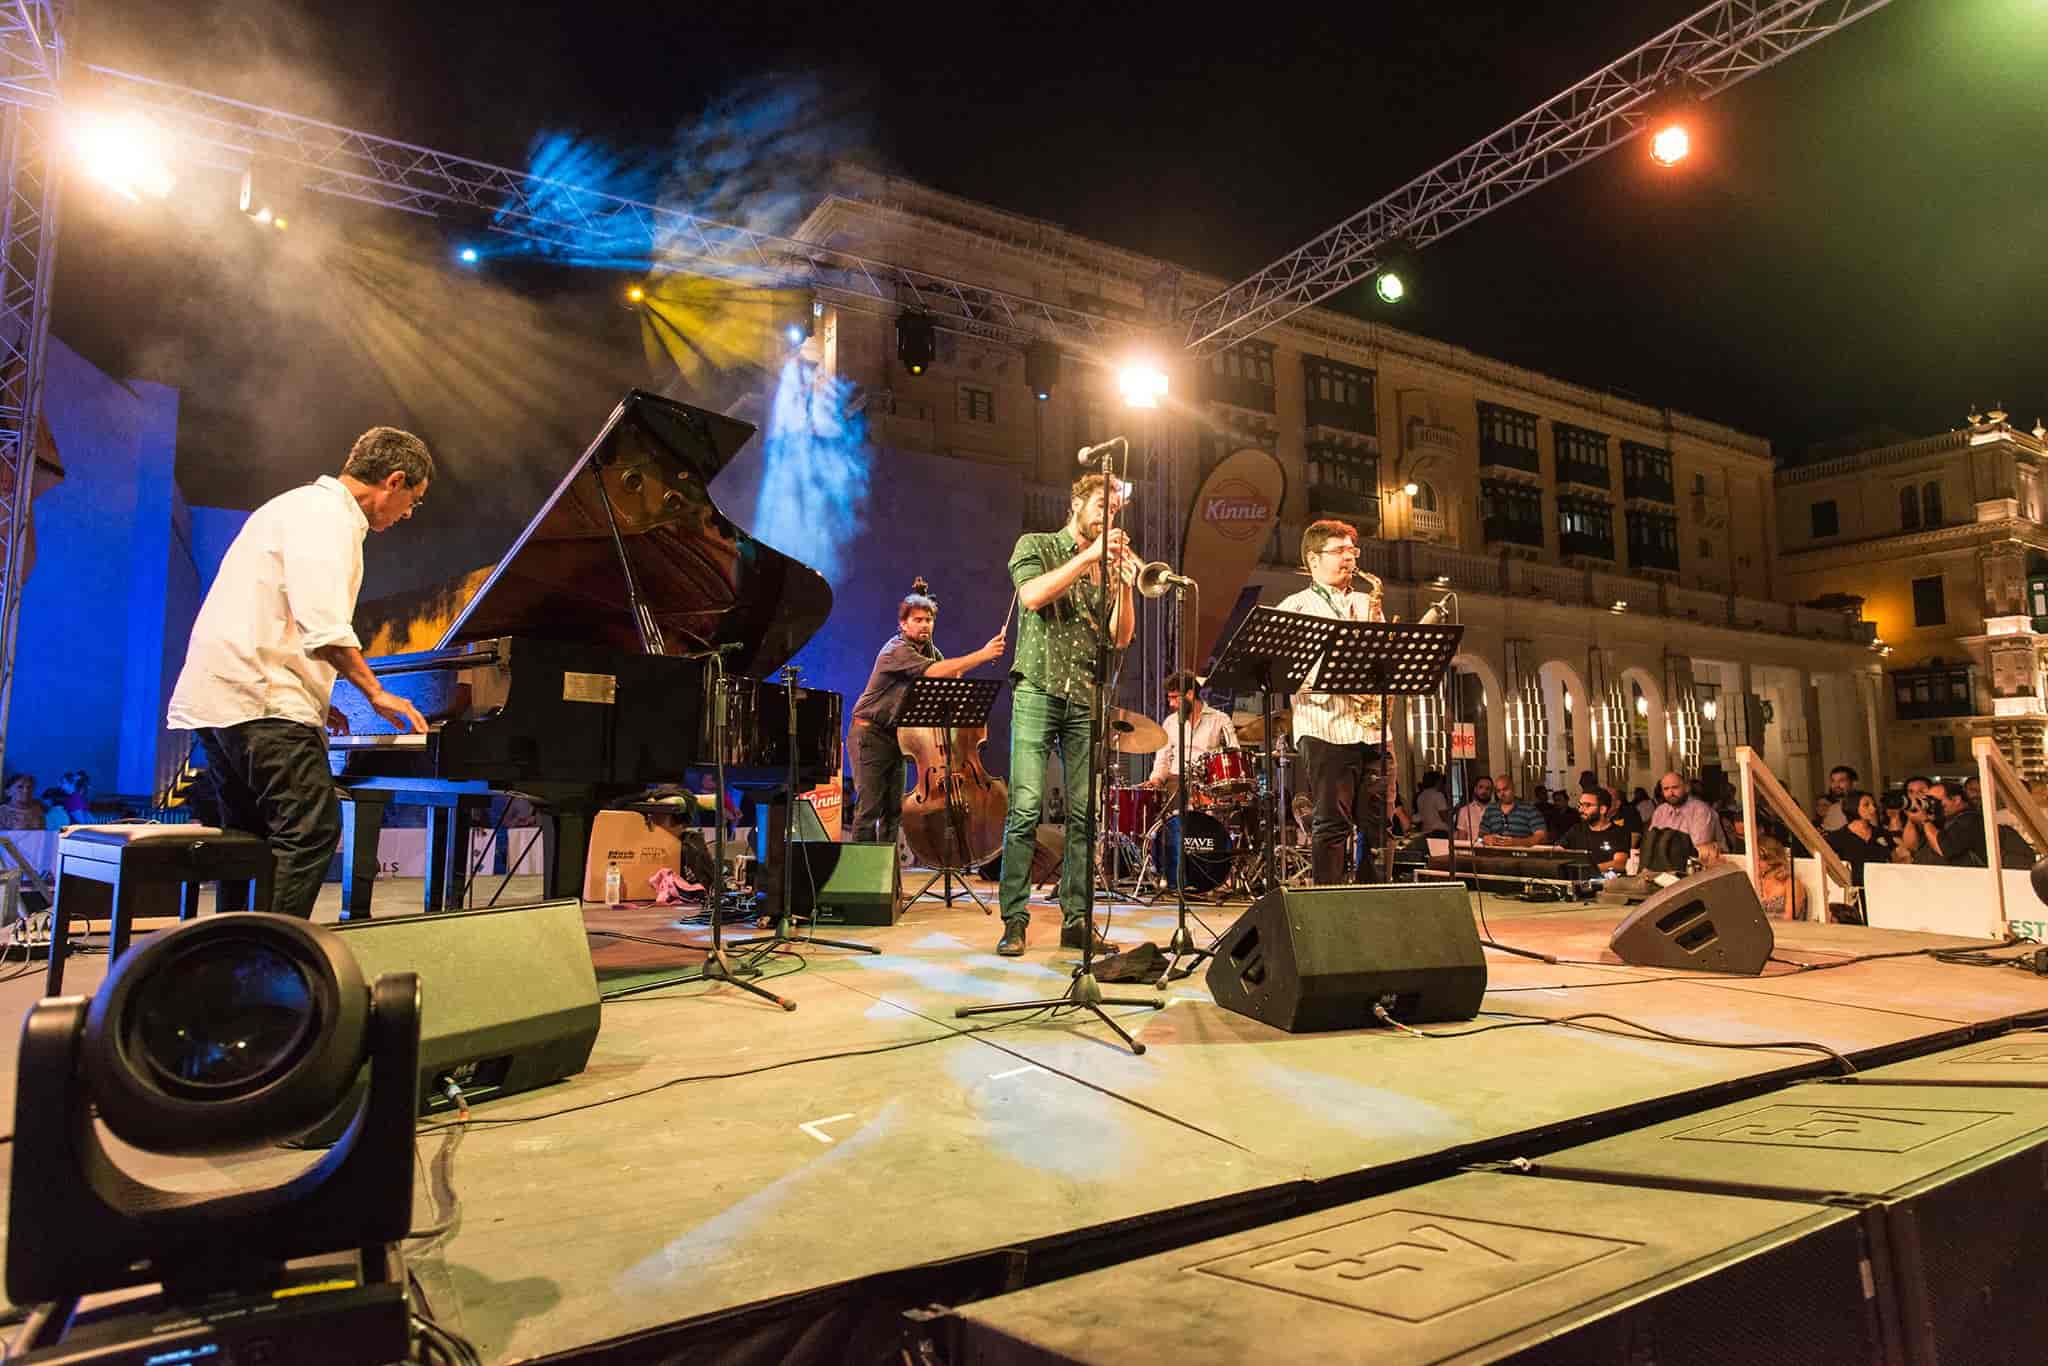 People playing on stage during the Jazz Festival.